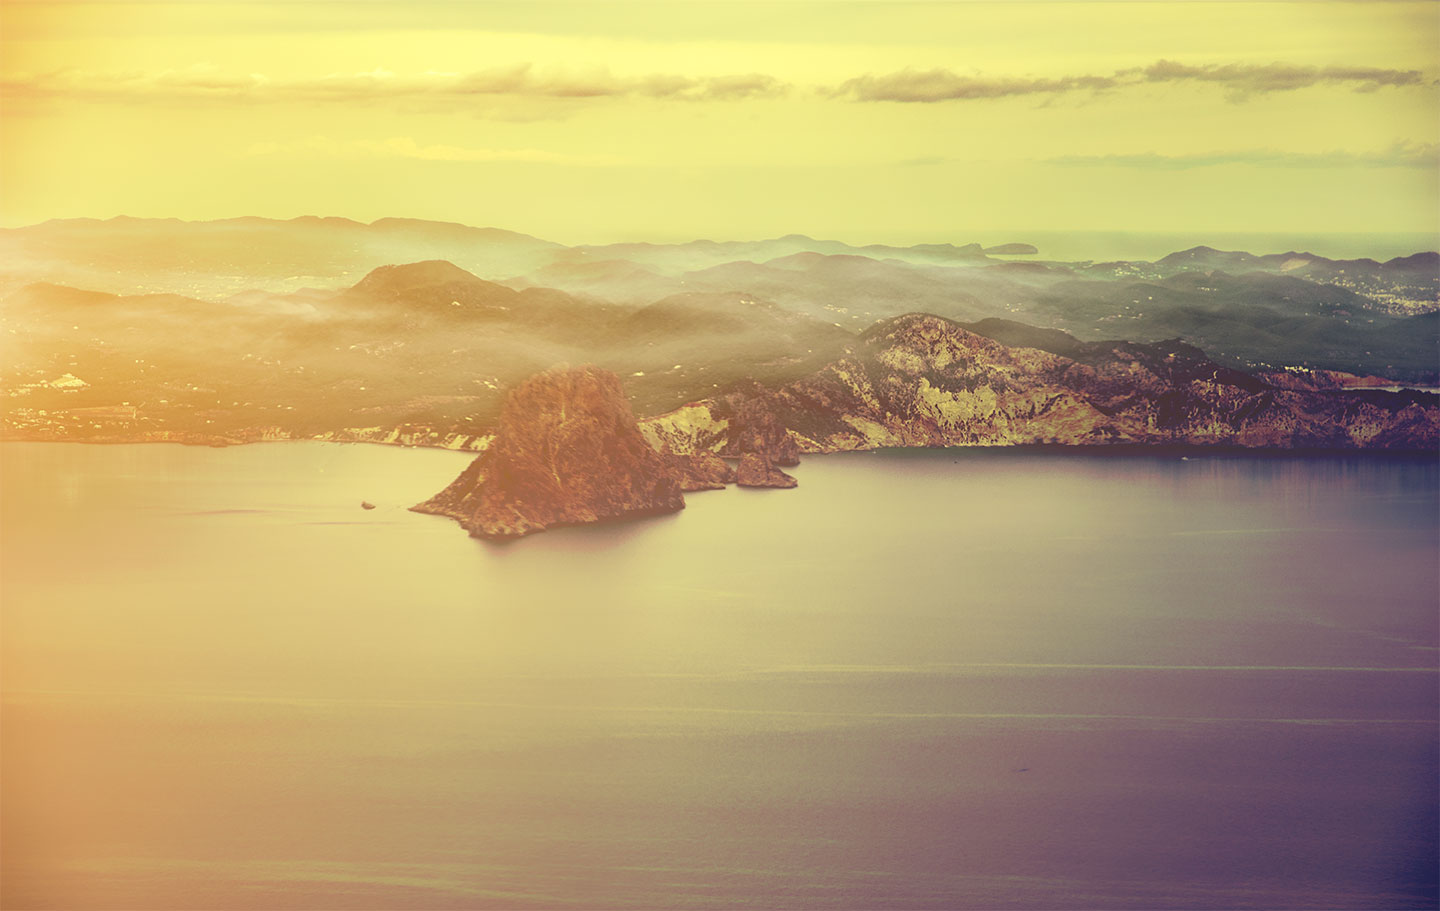 Ibiza island seen from the sky by sunset and mist fog on the hills, Catalonia, Spain. (Nos Dren).